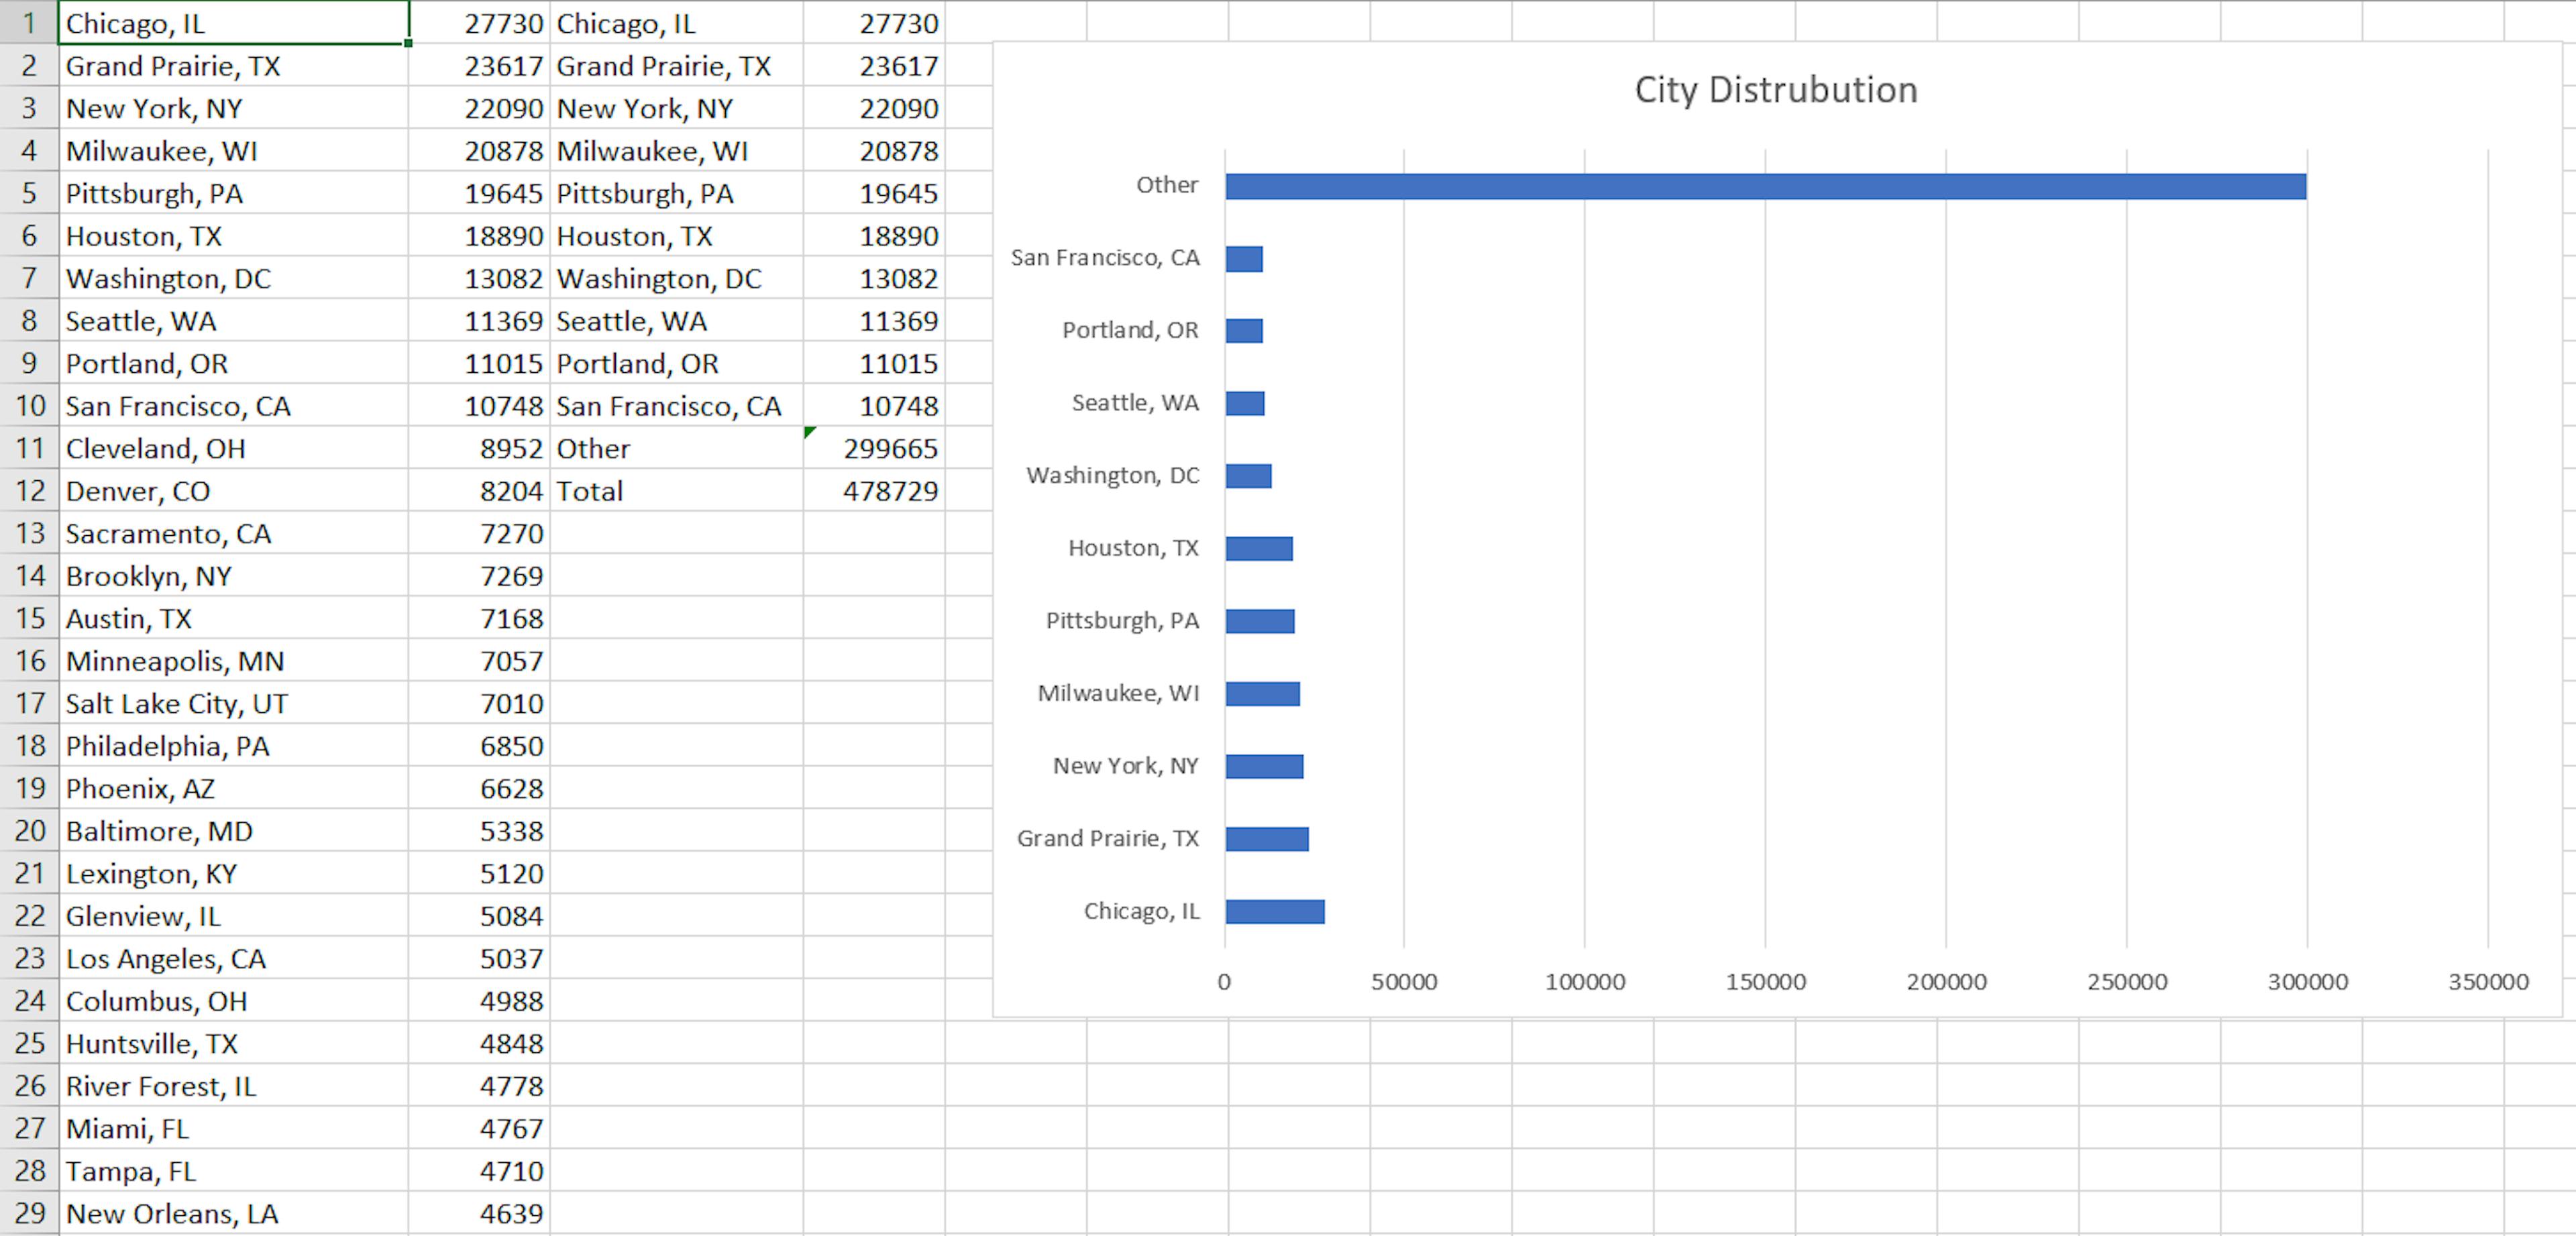 Total numbers of customers by US city